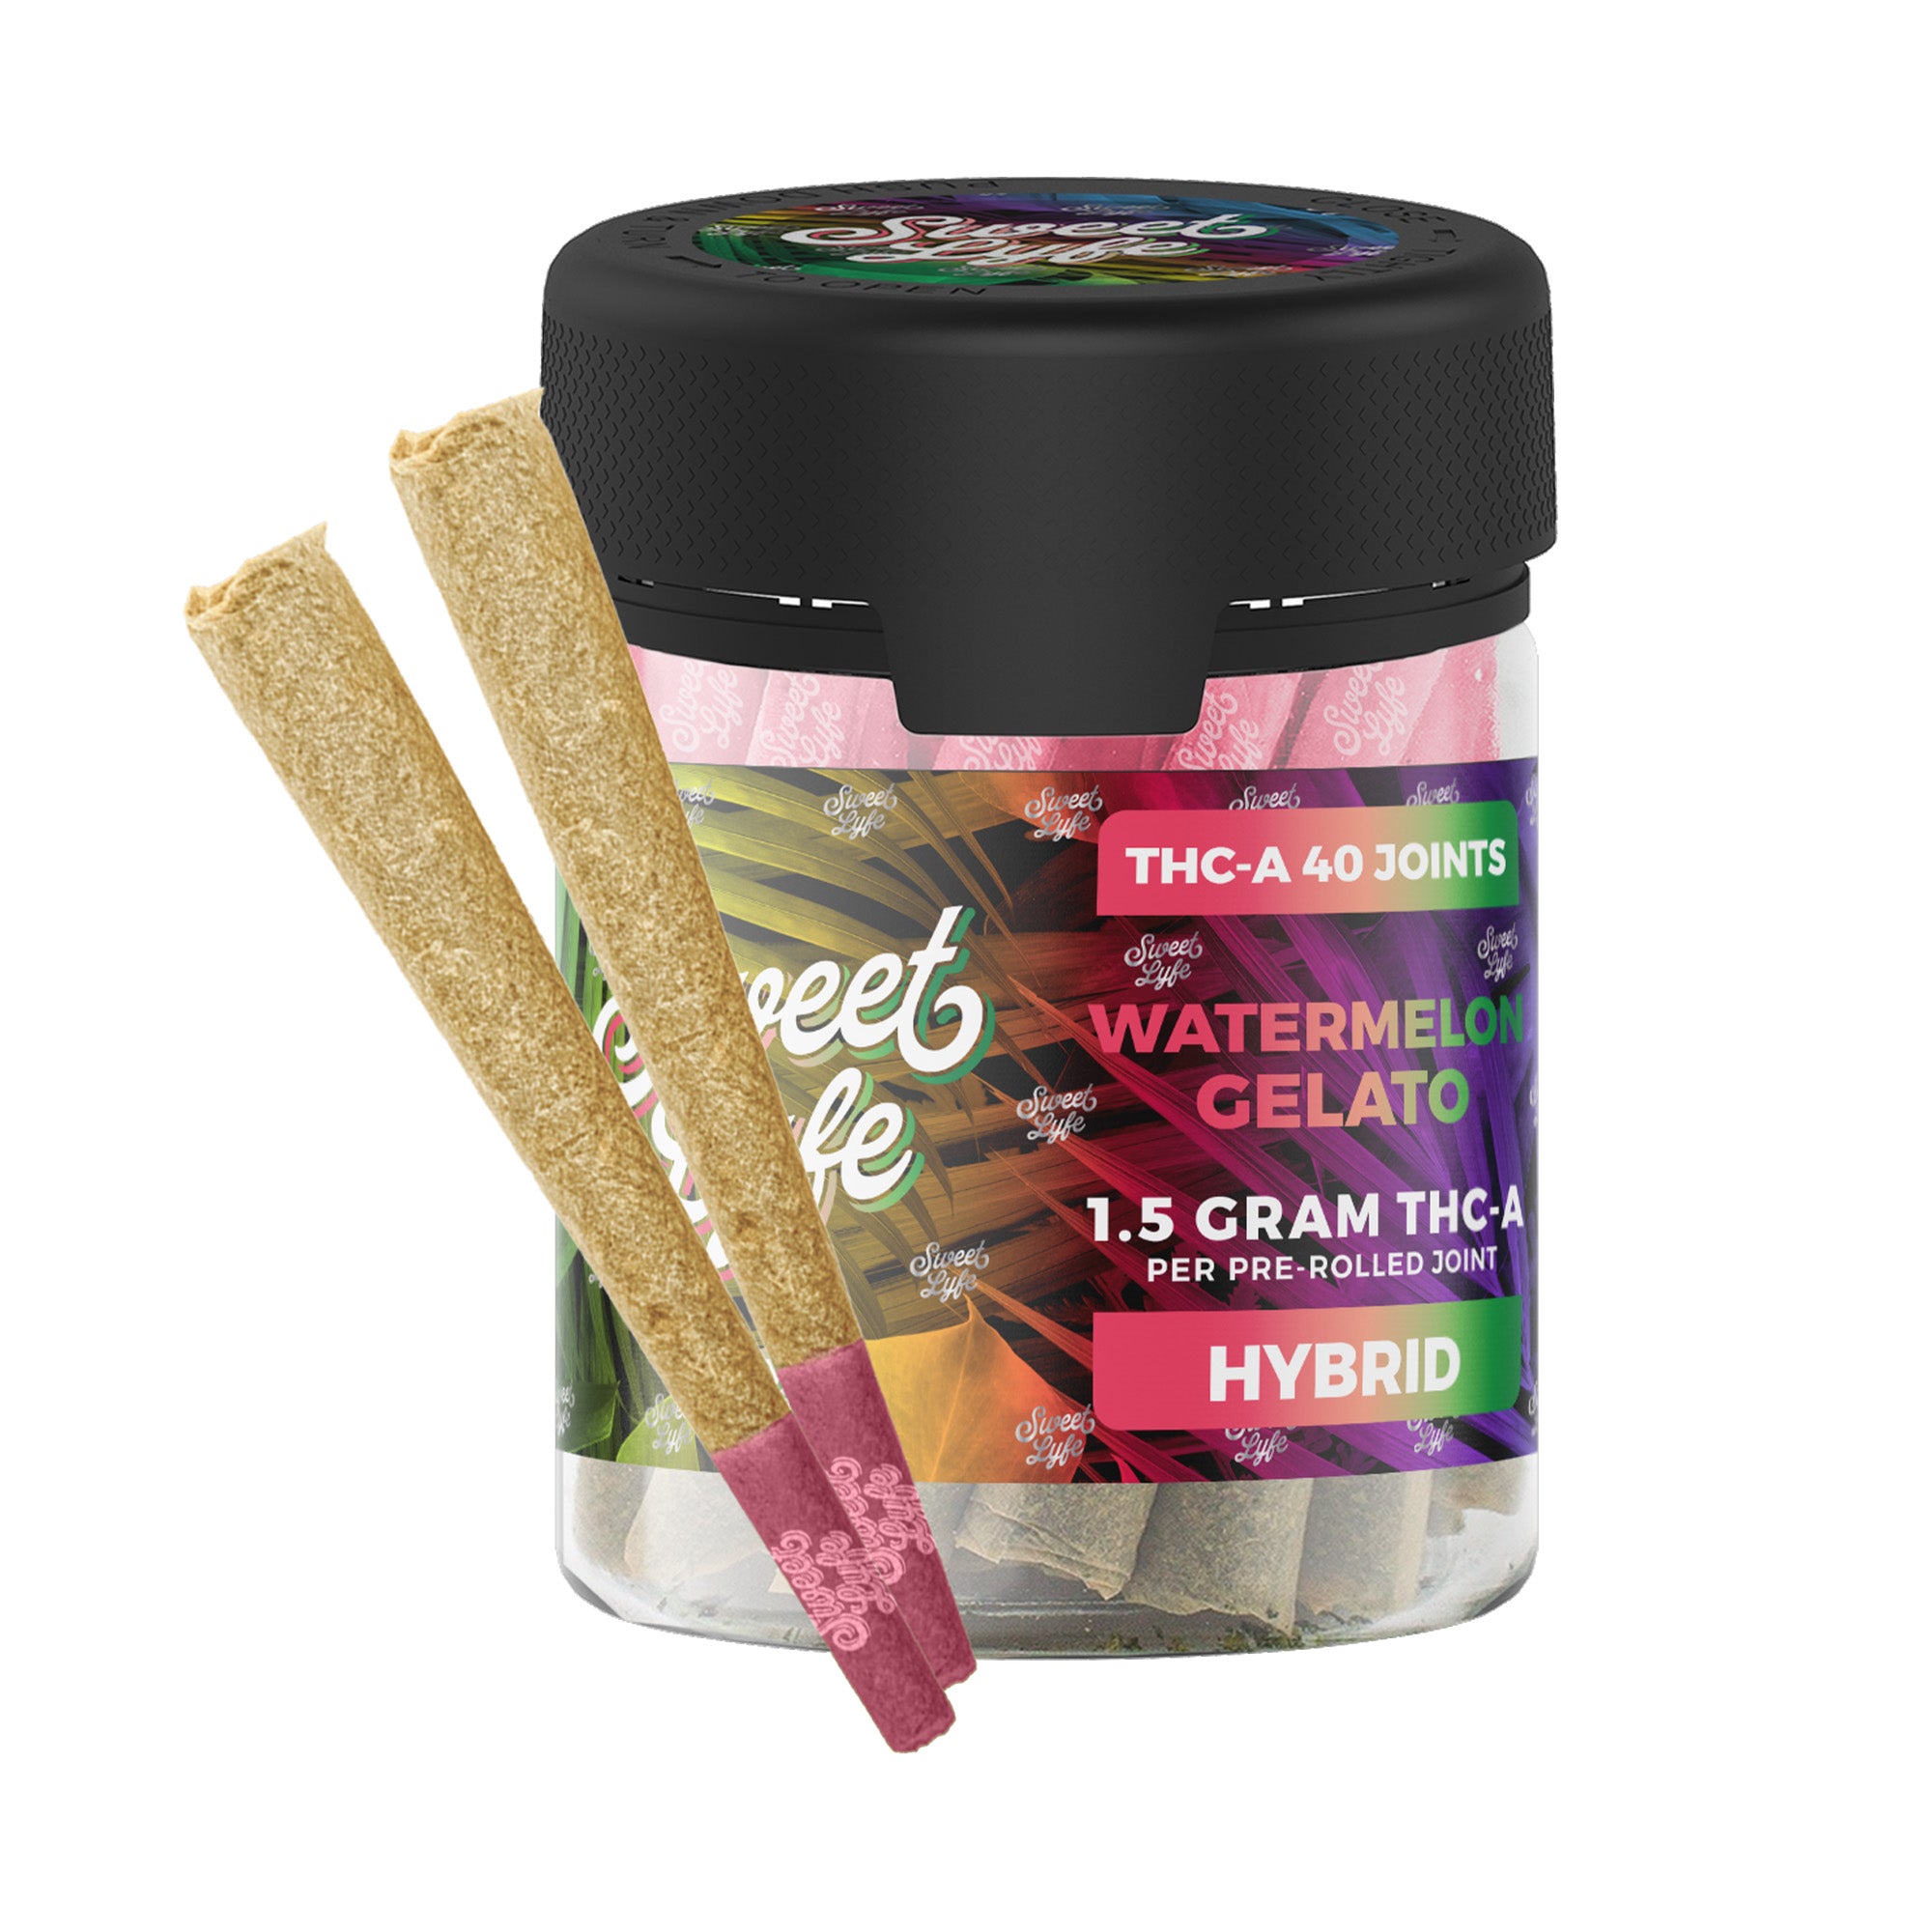 40 Pack of Joints THC-A - 1.5 gram TCH-A Per Joint Watermelon Gelato - Hybrid